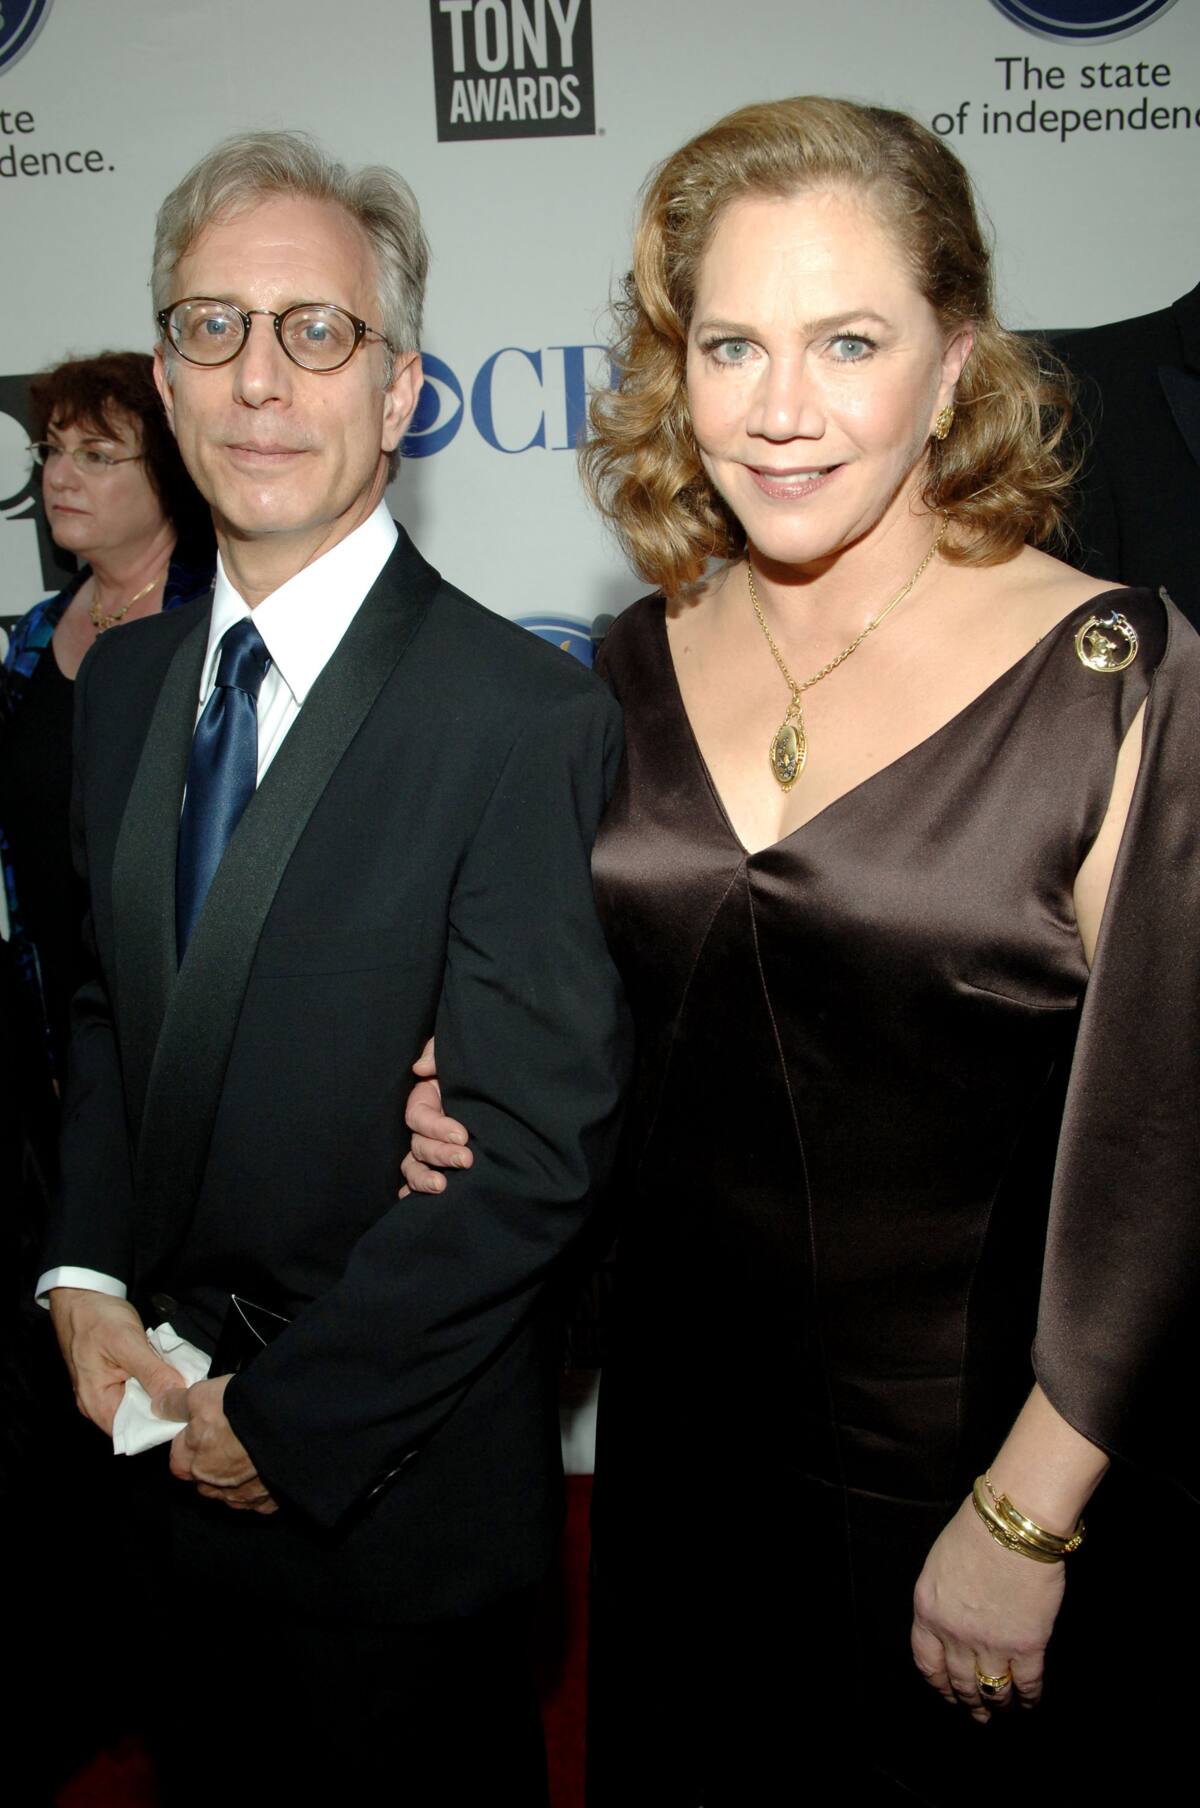 The untold story of Jay Weiss and Kathleen Turner's relationship